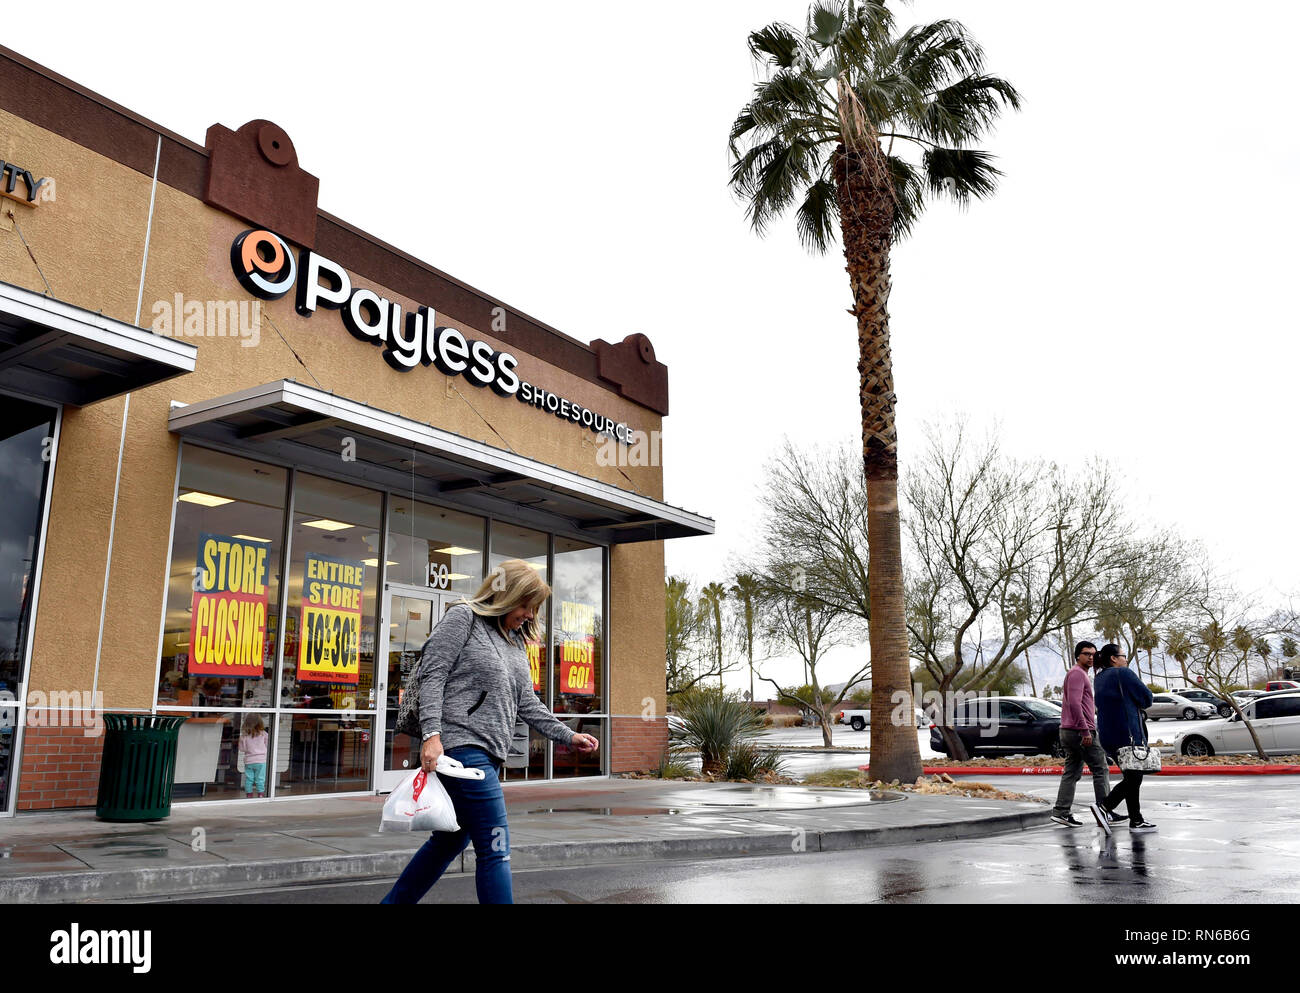 Las Vegas, Nevada, USA. 17th Feb, 2019. Customers walk by a Payless ShoeSource store on February 17, 2019 in Las Vegas, Nevada. The Kansas based discount shoe store kicked off liquidation sales Sunday, attracting not only bargain shoppers but longtime fans of the store, which confirmed Friday it is ceasing all operations in the U.S. and Puerto Rico. Credit: David Becker/ZUMA Wire/Alamy Live News Stock Photo